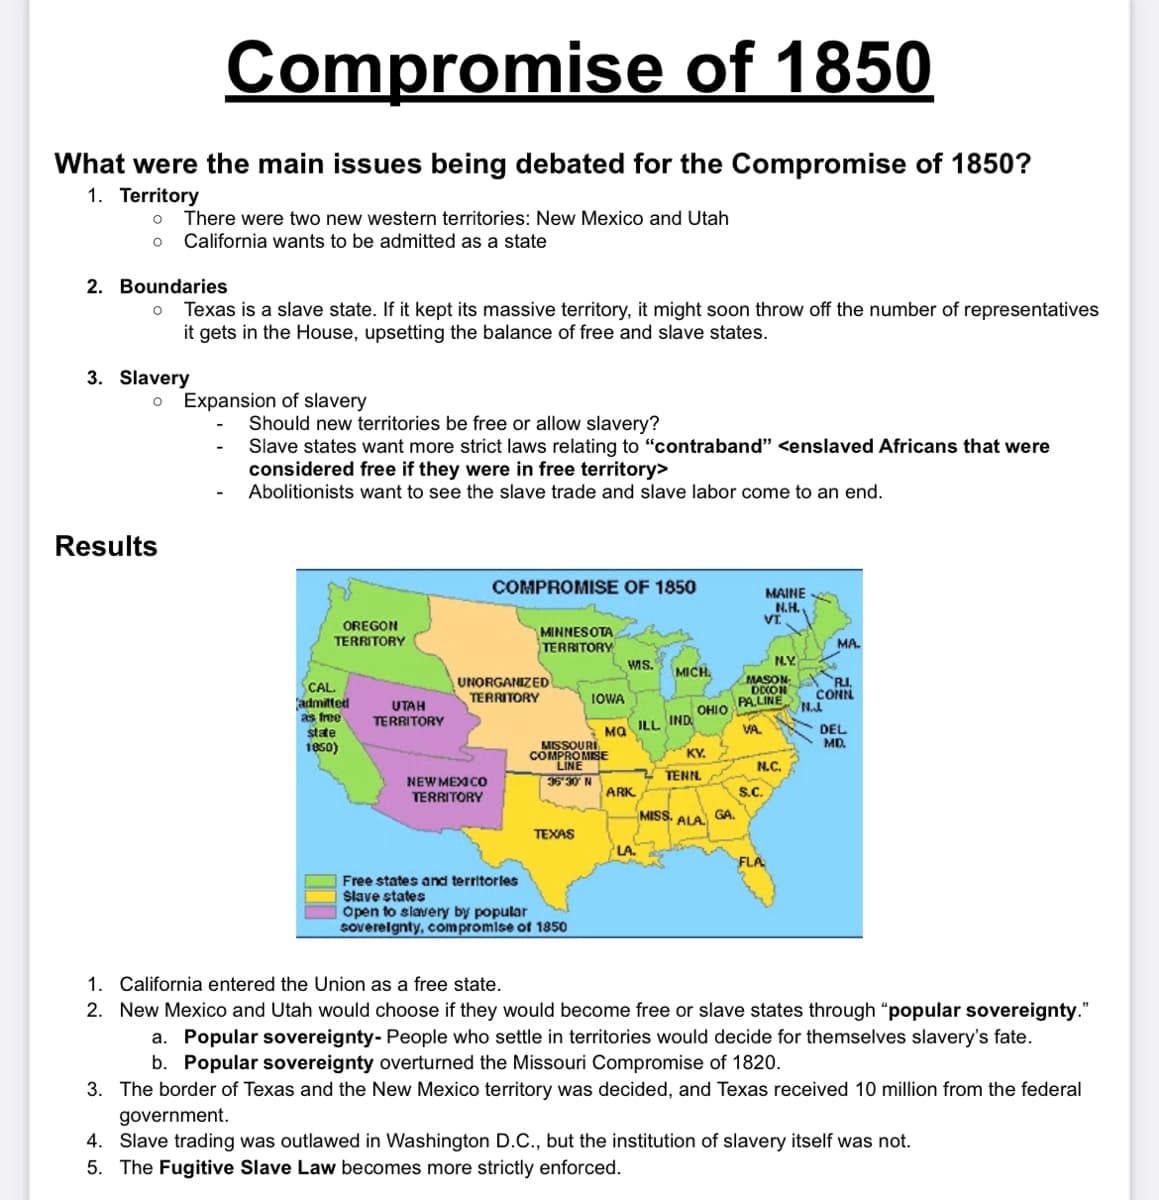 What were the main issues being debated for the Compromise of 1850?
1. Territory
O
Compromise of 1850
There were two new western territories: New Mexico and Utah
O California wants to be admitted as a state
2. Boundaries
O
3. Slavery
Texas is a slave state. If it kept its massive territory, it might soon throw off the number of representatives
it gets in the House, upsetting the balance of free and slave states.
Results
O Expansion of slavery
Should new territories be free or allow slavery?
Slave states want more strict laws relating to "contraband" <enslaved Africans that were
considered free if they were in free territory>
Abolitionists want to see the slave trade and slave labor come to an end.
OREGON
TERRITORY
CAL.
admitted
as free
state
1850)
UTAH
TERRITORY
COMPROMISE OF 1850
NEW MEXICO
TERRITORY
MINNESOTA
TERRITORY
UNORGANIZED
TERRITORY
TEXAS
IOWA
MISSOURI
COMPROMISE
LINE
36-30 N
Free states and territories
Slave states
Open to slavery by popular
sovereignty, compromise of 1850
MQ
WIS.
ARK
ILL IND
LA.
MICH
MISS.
OHIO
KY.
TENN.
ALA
GA.
MAINE
N.H.
VI.
S.C.
MASON
DION
PALINE
VA.
N.Y.
N.C.
FLA
MA
R.I.
CONN
N...
DEL
MD.
1. California entered the Union as a free state.
2. New Mexico and Utah would choose if they would become free or slave states through "popular sovereignty."
a. Popular sovereignty- People who settle in territories would decide for themselves slavery's fate.
b. Popular sovereignty overturned the Missouri Compromise of 1820.
3. The border of Texas and the New Mexico territory was decided, and Texas received 10 million from the federal
government.
4. Slave trading was outlawed in Washington D.C., but the institution of slavery itself was not.
5. The Fugitive Slave Law becomes more strictly enforced.